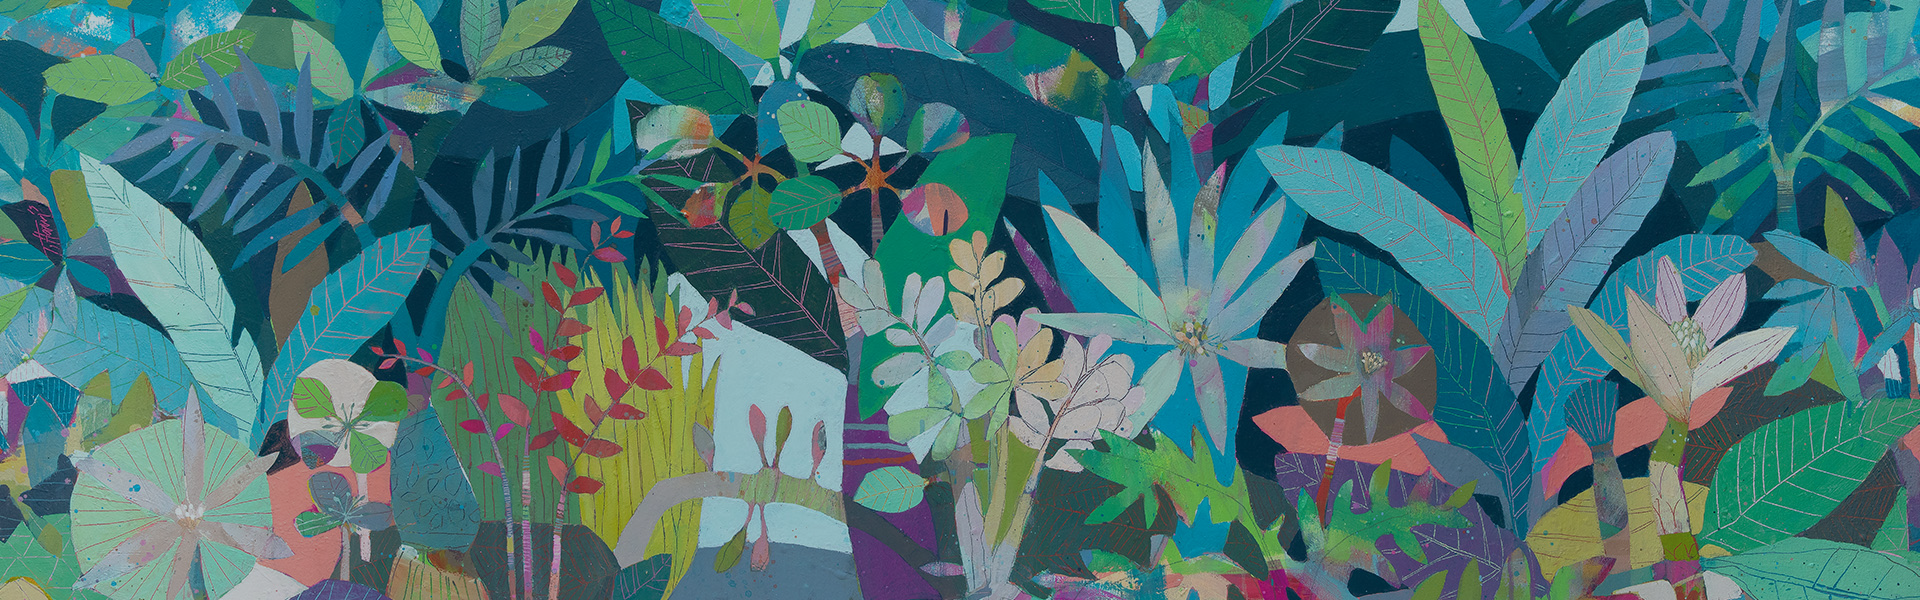 CONNECTING TO THE NATURAL WORLD WITH ARTIST, TIFFANY KINGSTON